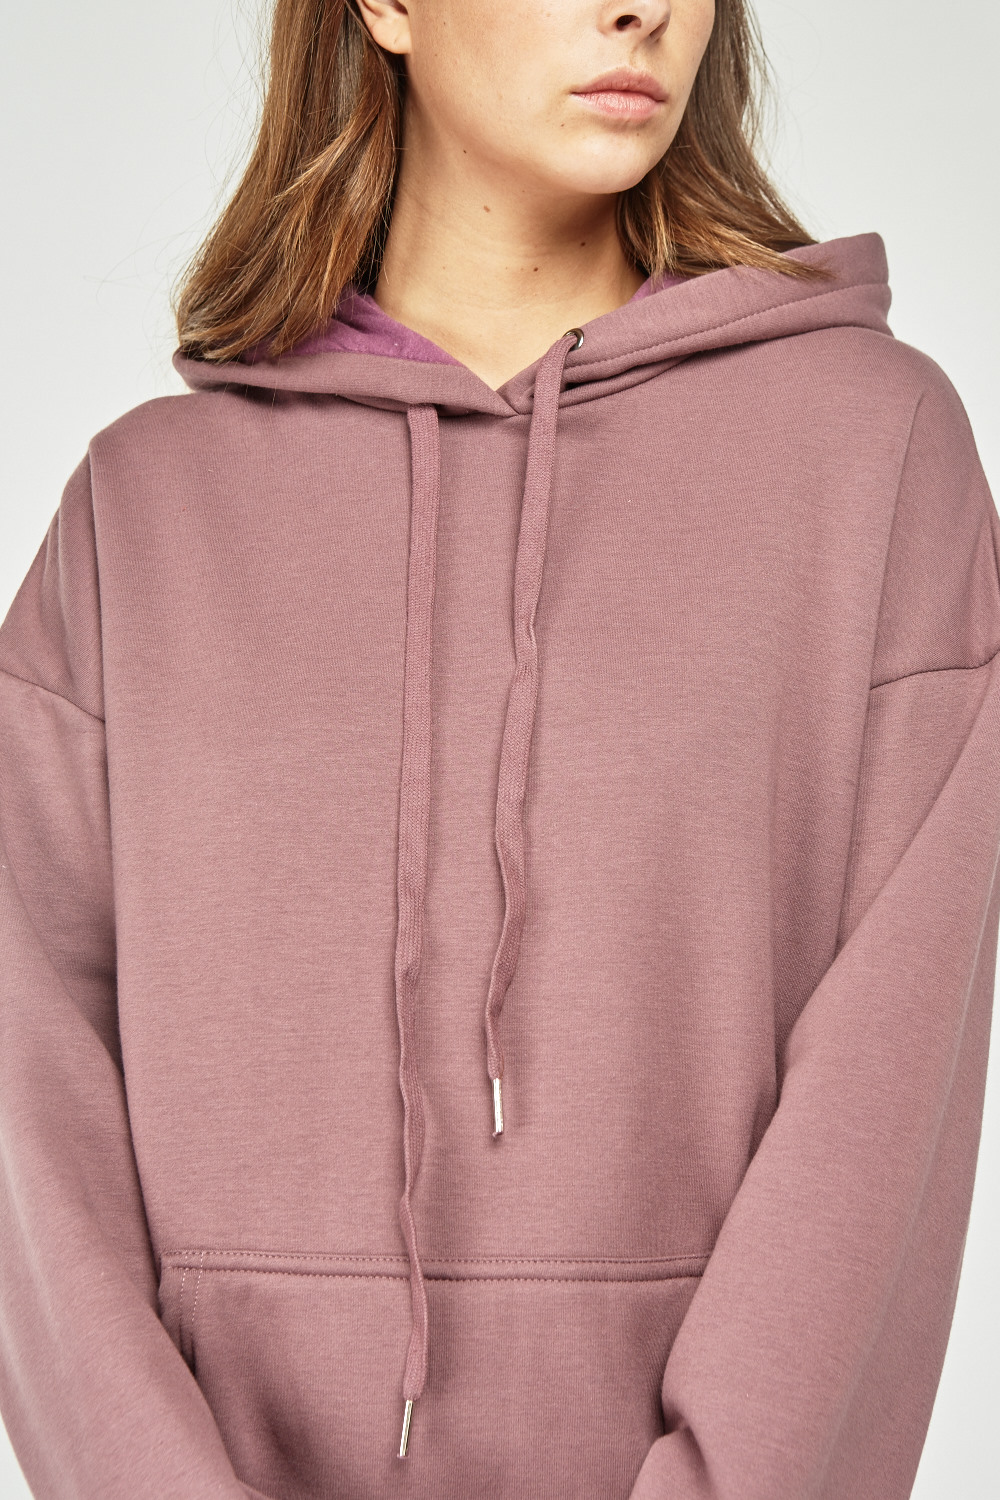 Pouch Pocket Front Plain Hoodie - Just $7